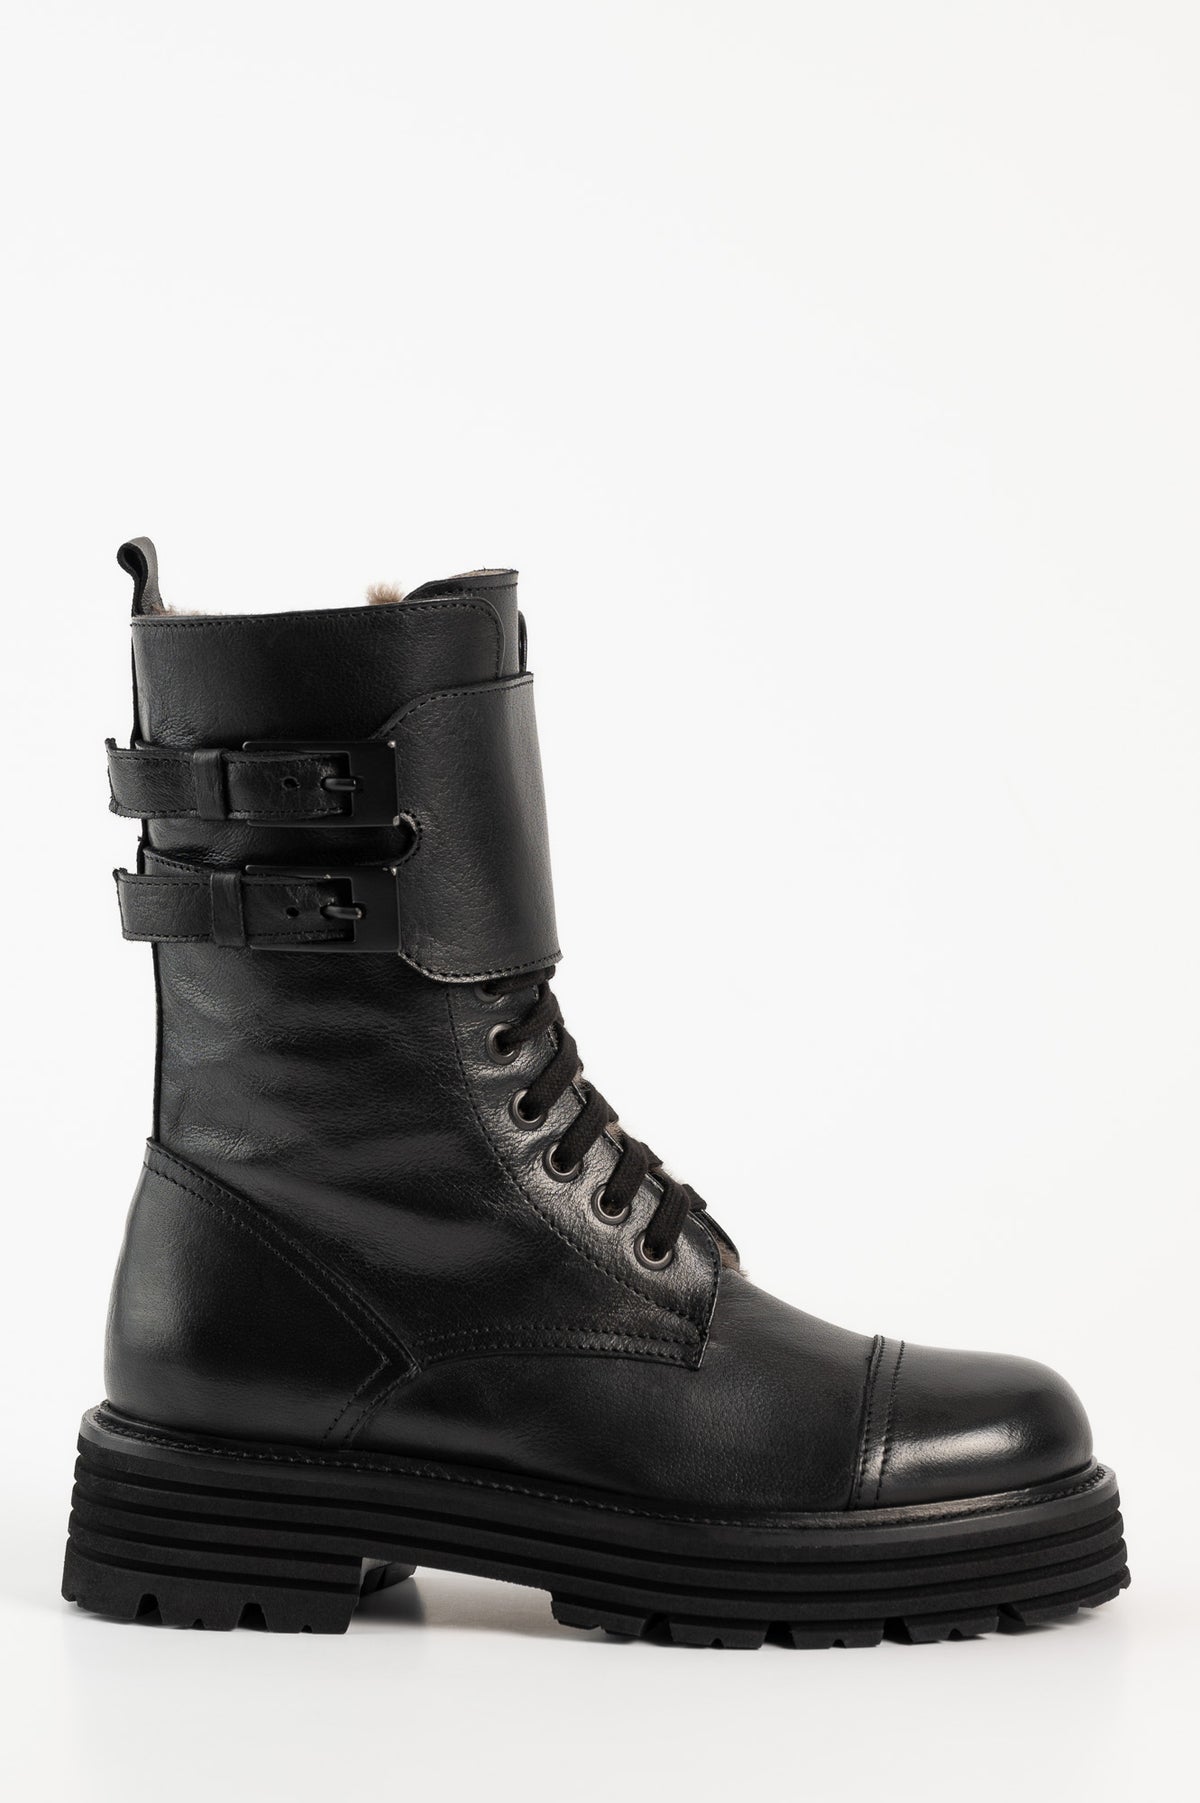 Warm Lined Boot Gilda 441 | Black Leather